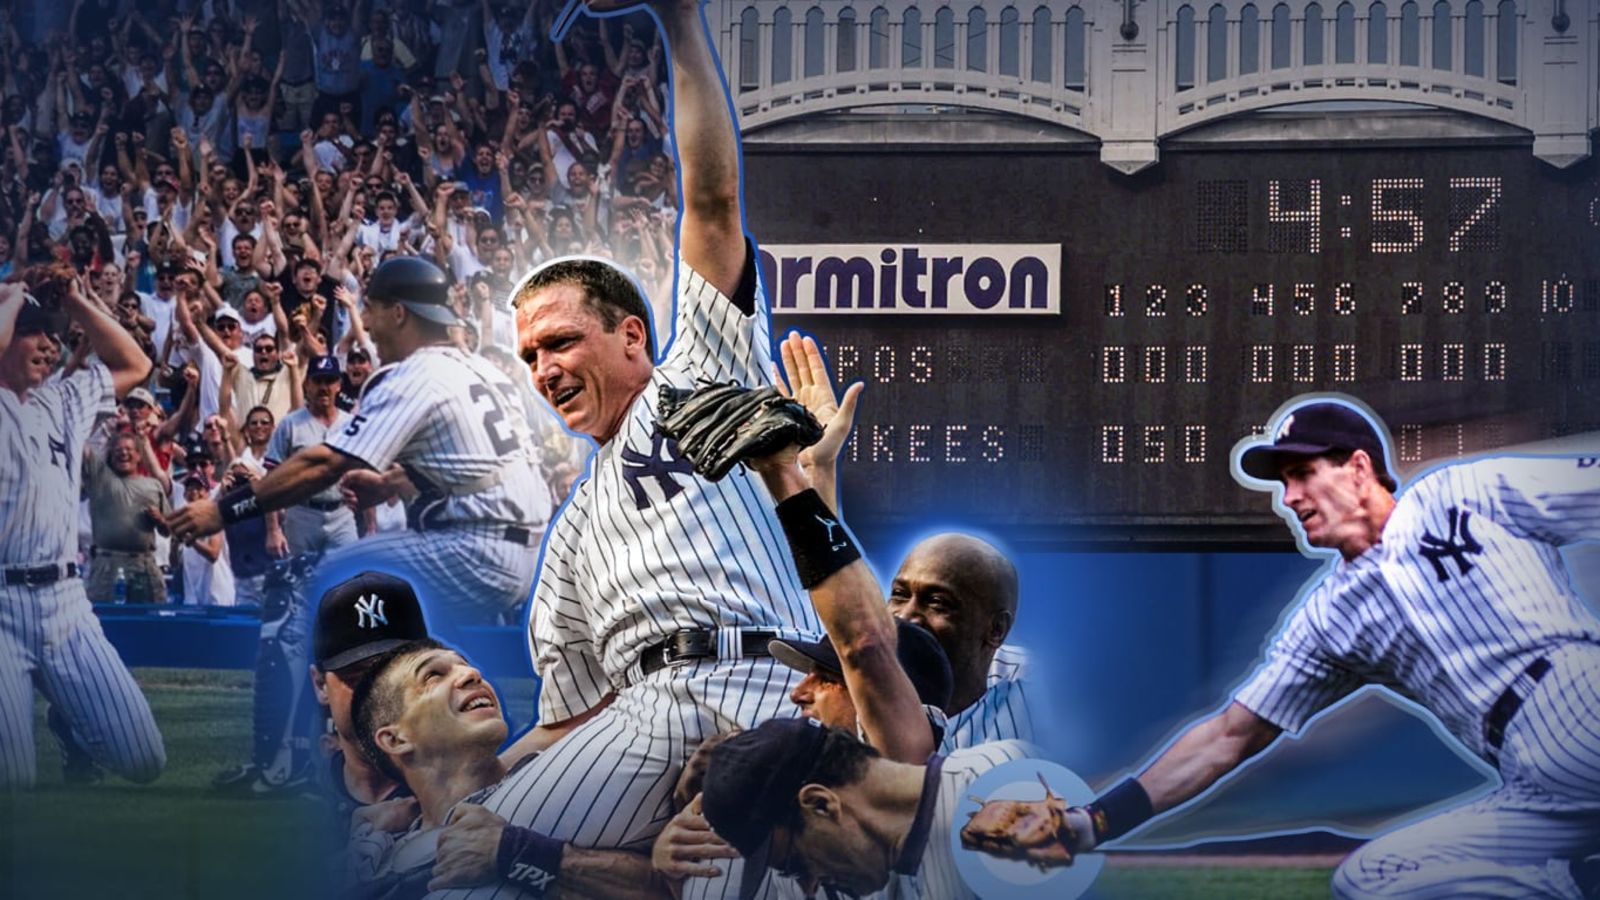 Illustration for article titled David Cone’s perfect game